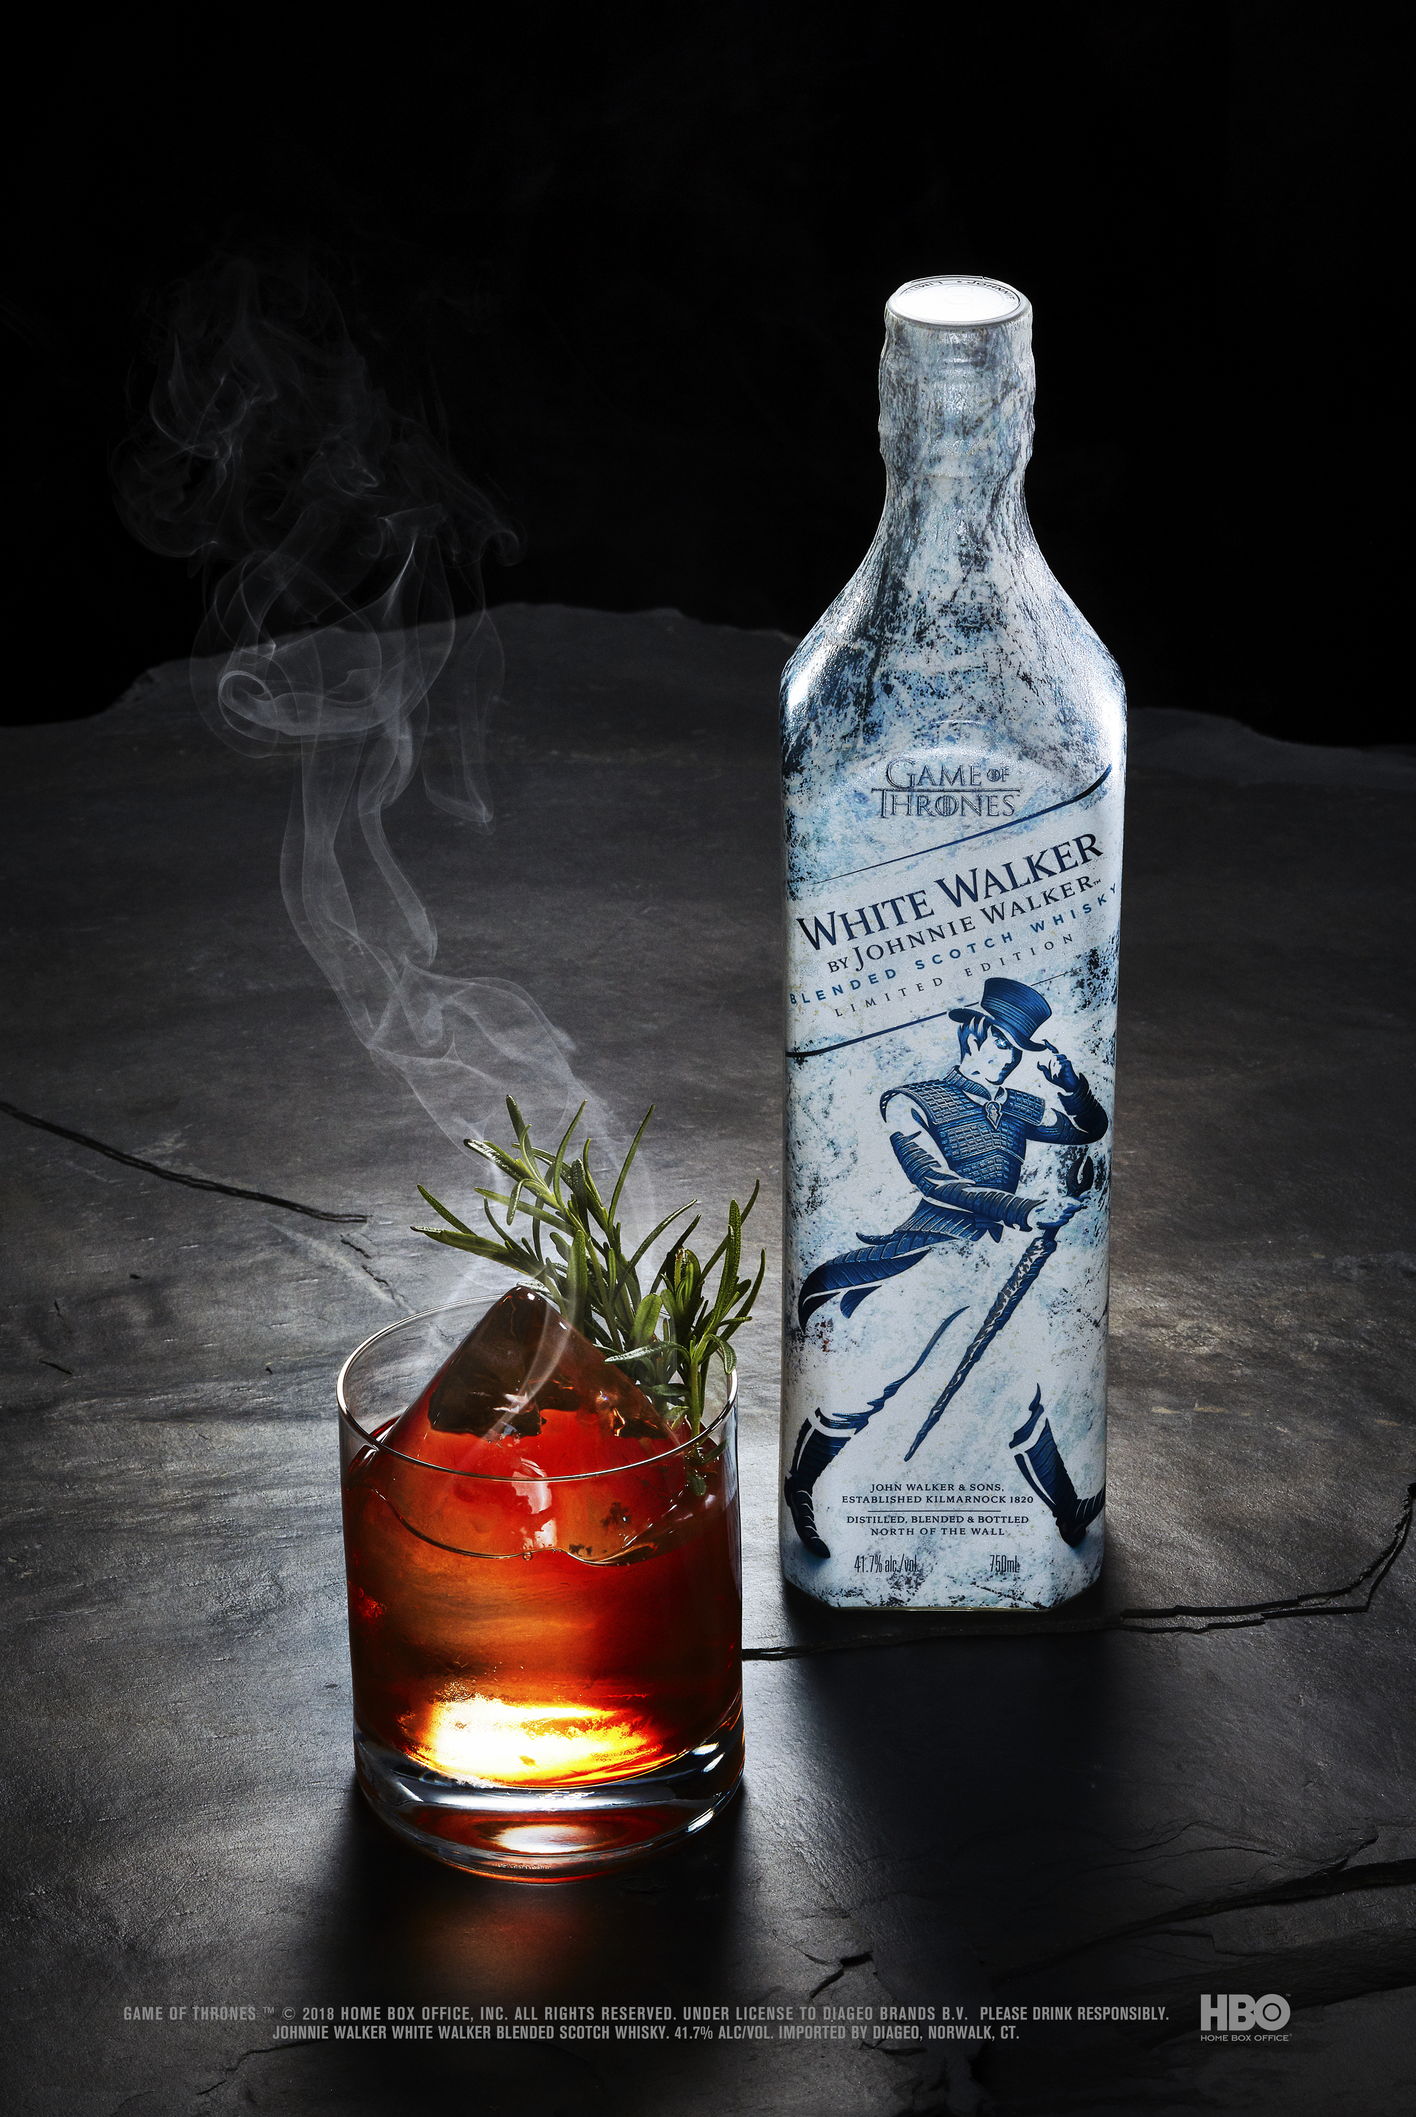 Dragonglass Old Fashioned cocktail with bottle - White Walker by Johnnie Walker specialty cocktail created by mixologist Gabe Orta